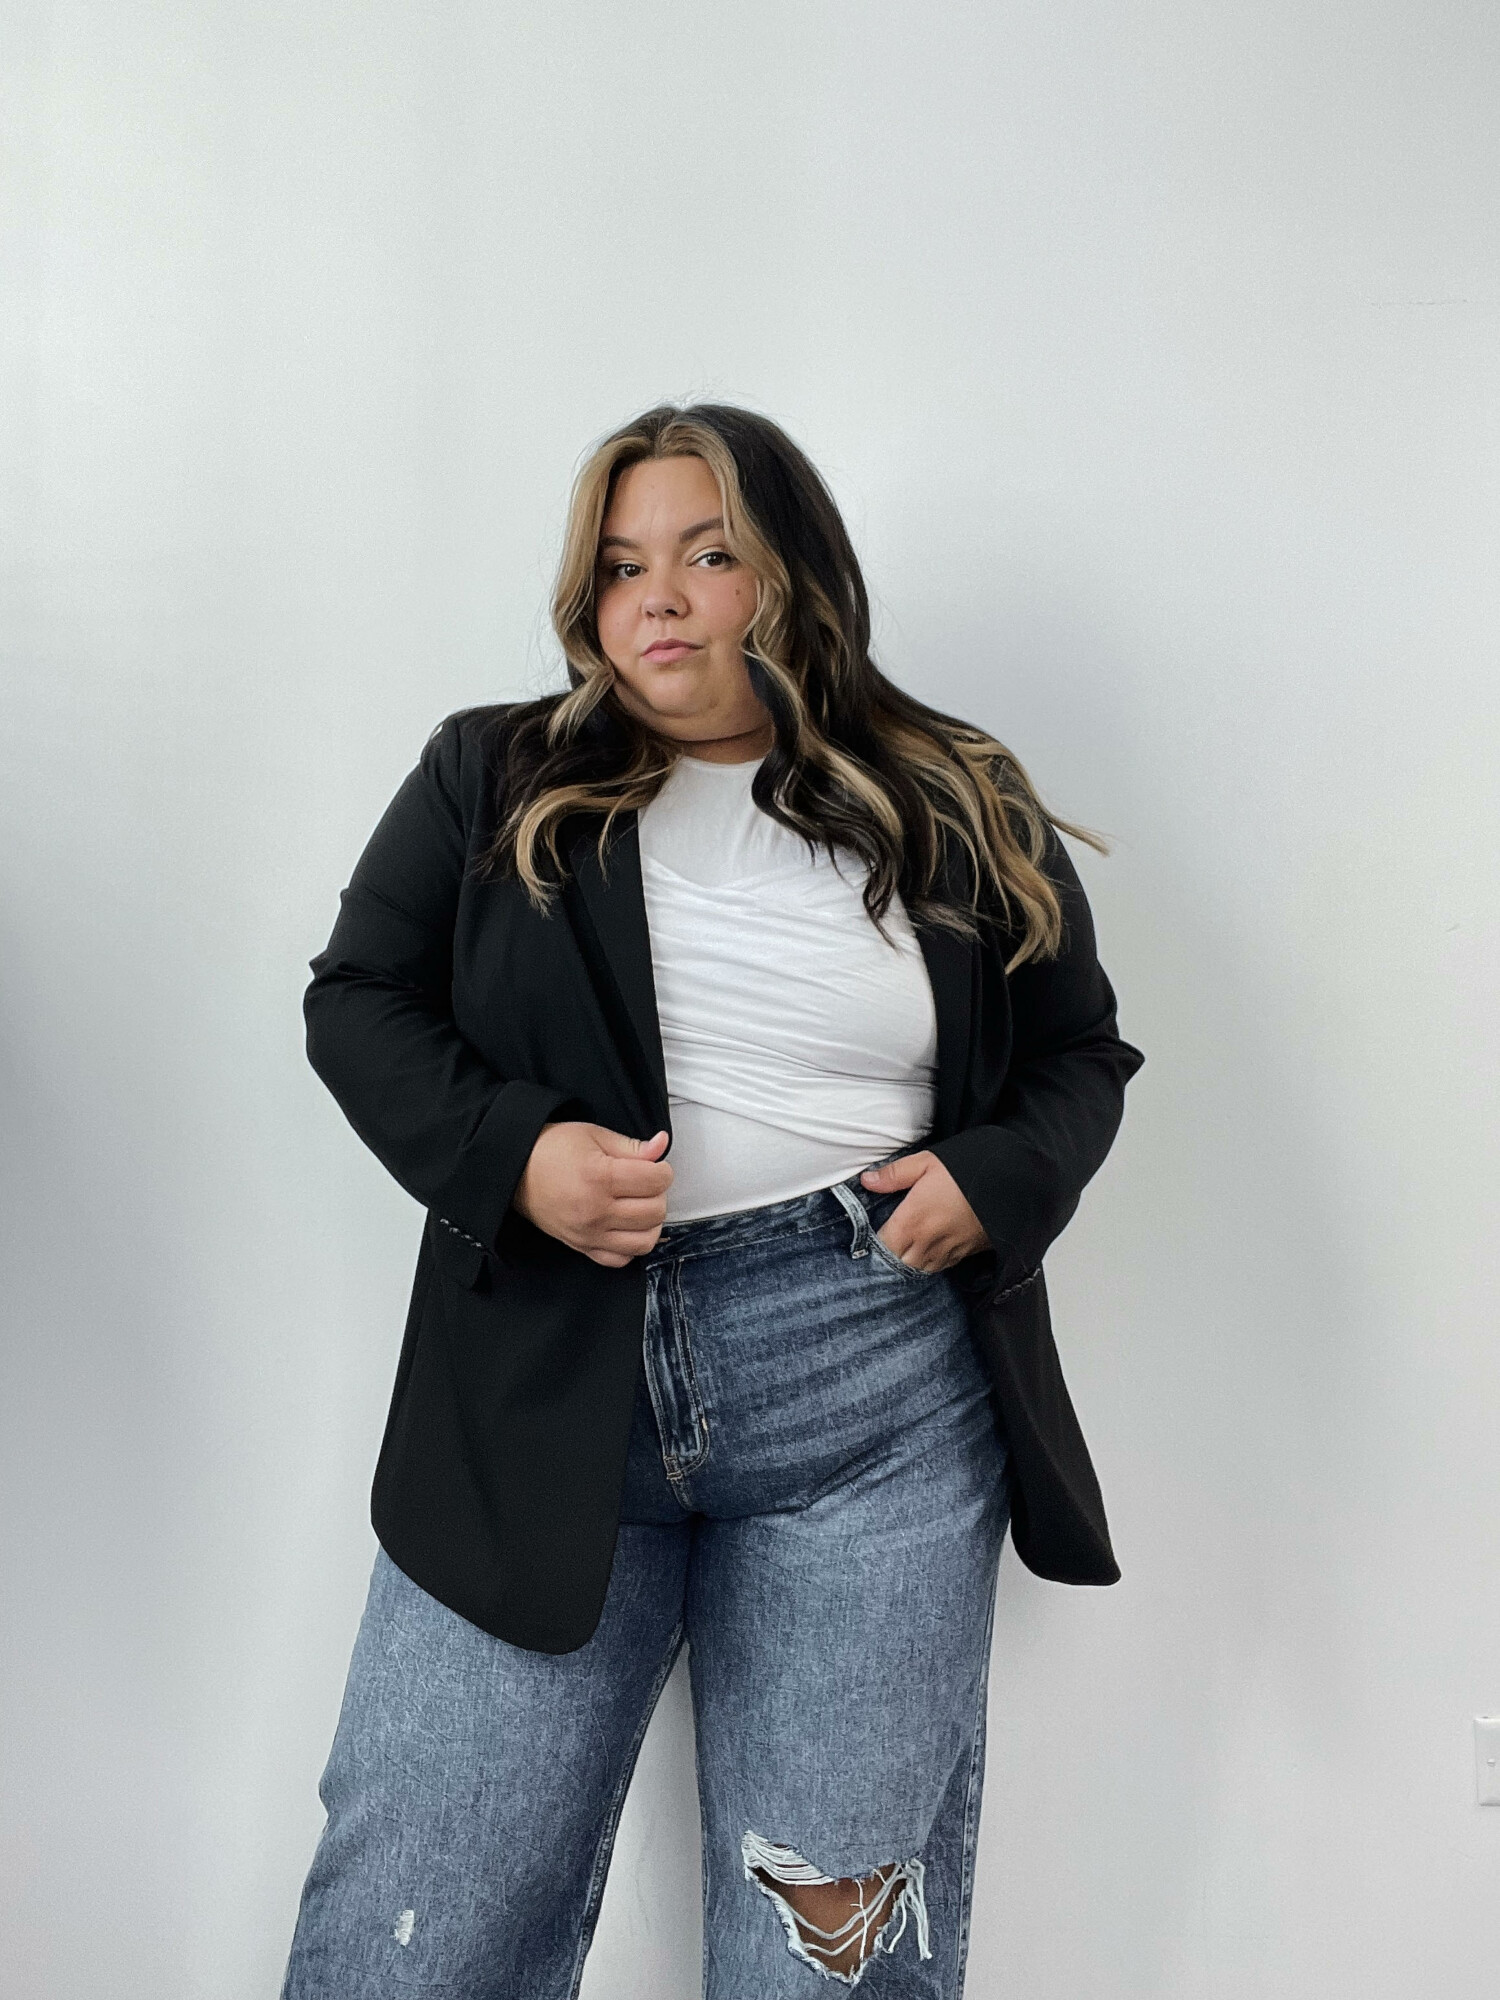 Where to buy stylish plus size work clothes according to Chicago plus size fashion blogger Natalie in the City.